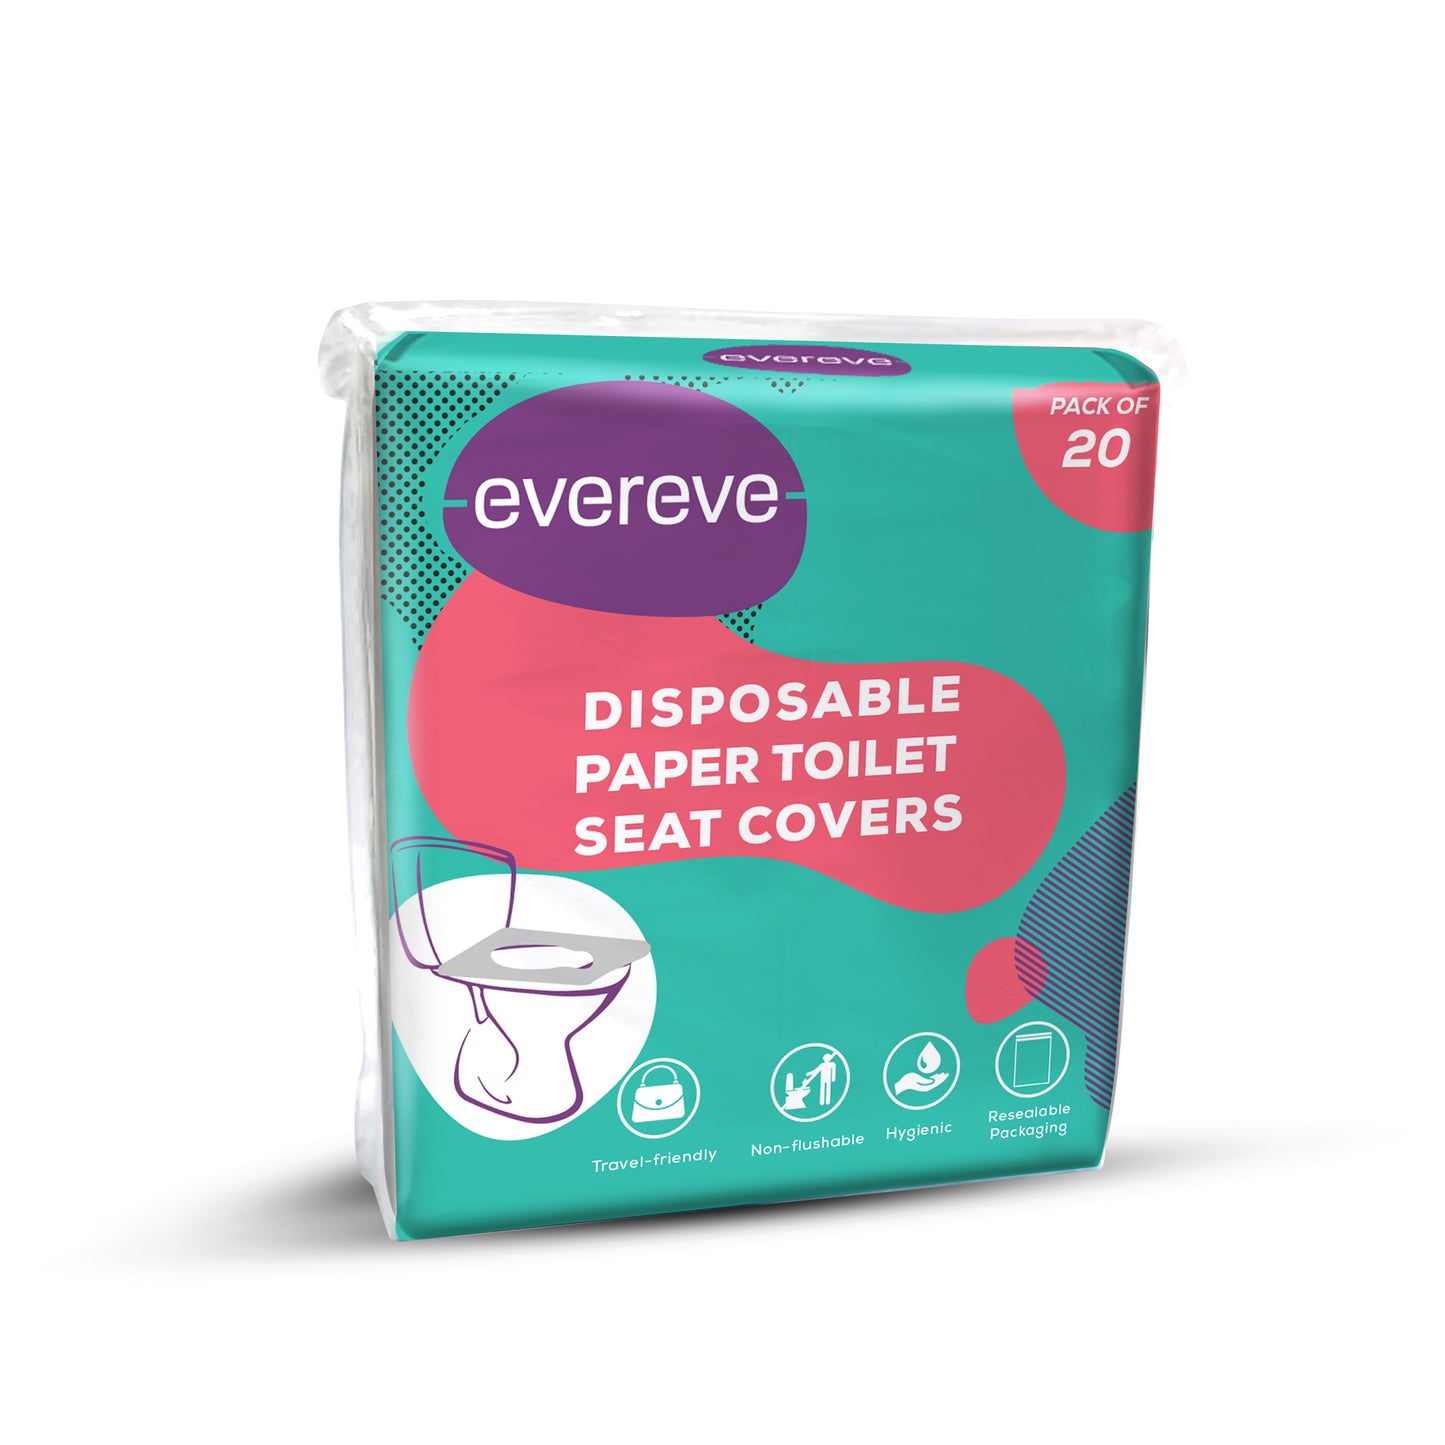 Evereve Disposable Paper Toilet Seat Covers, 20's Pack